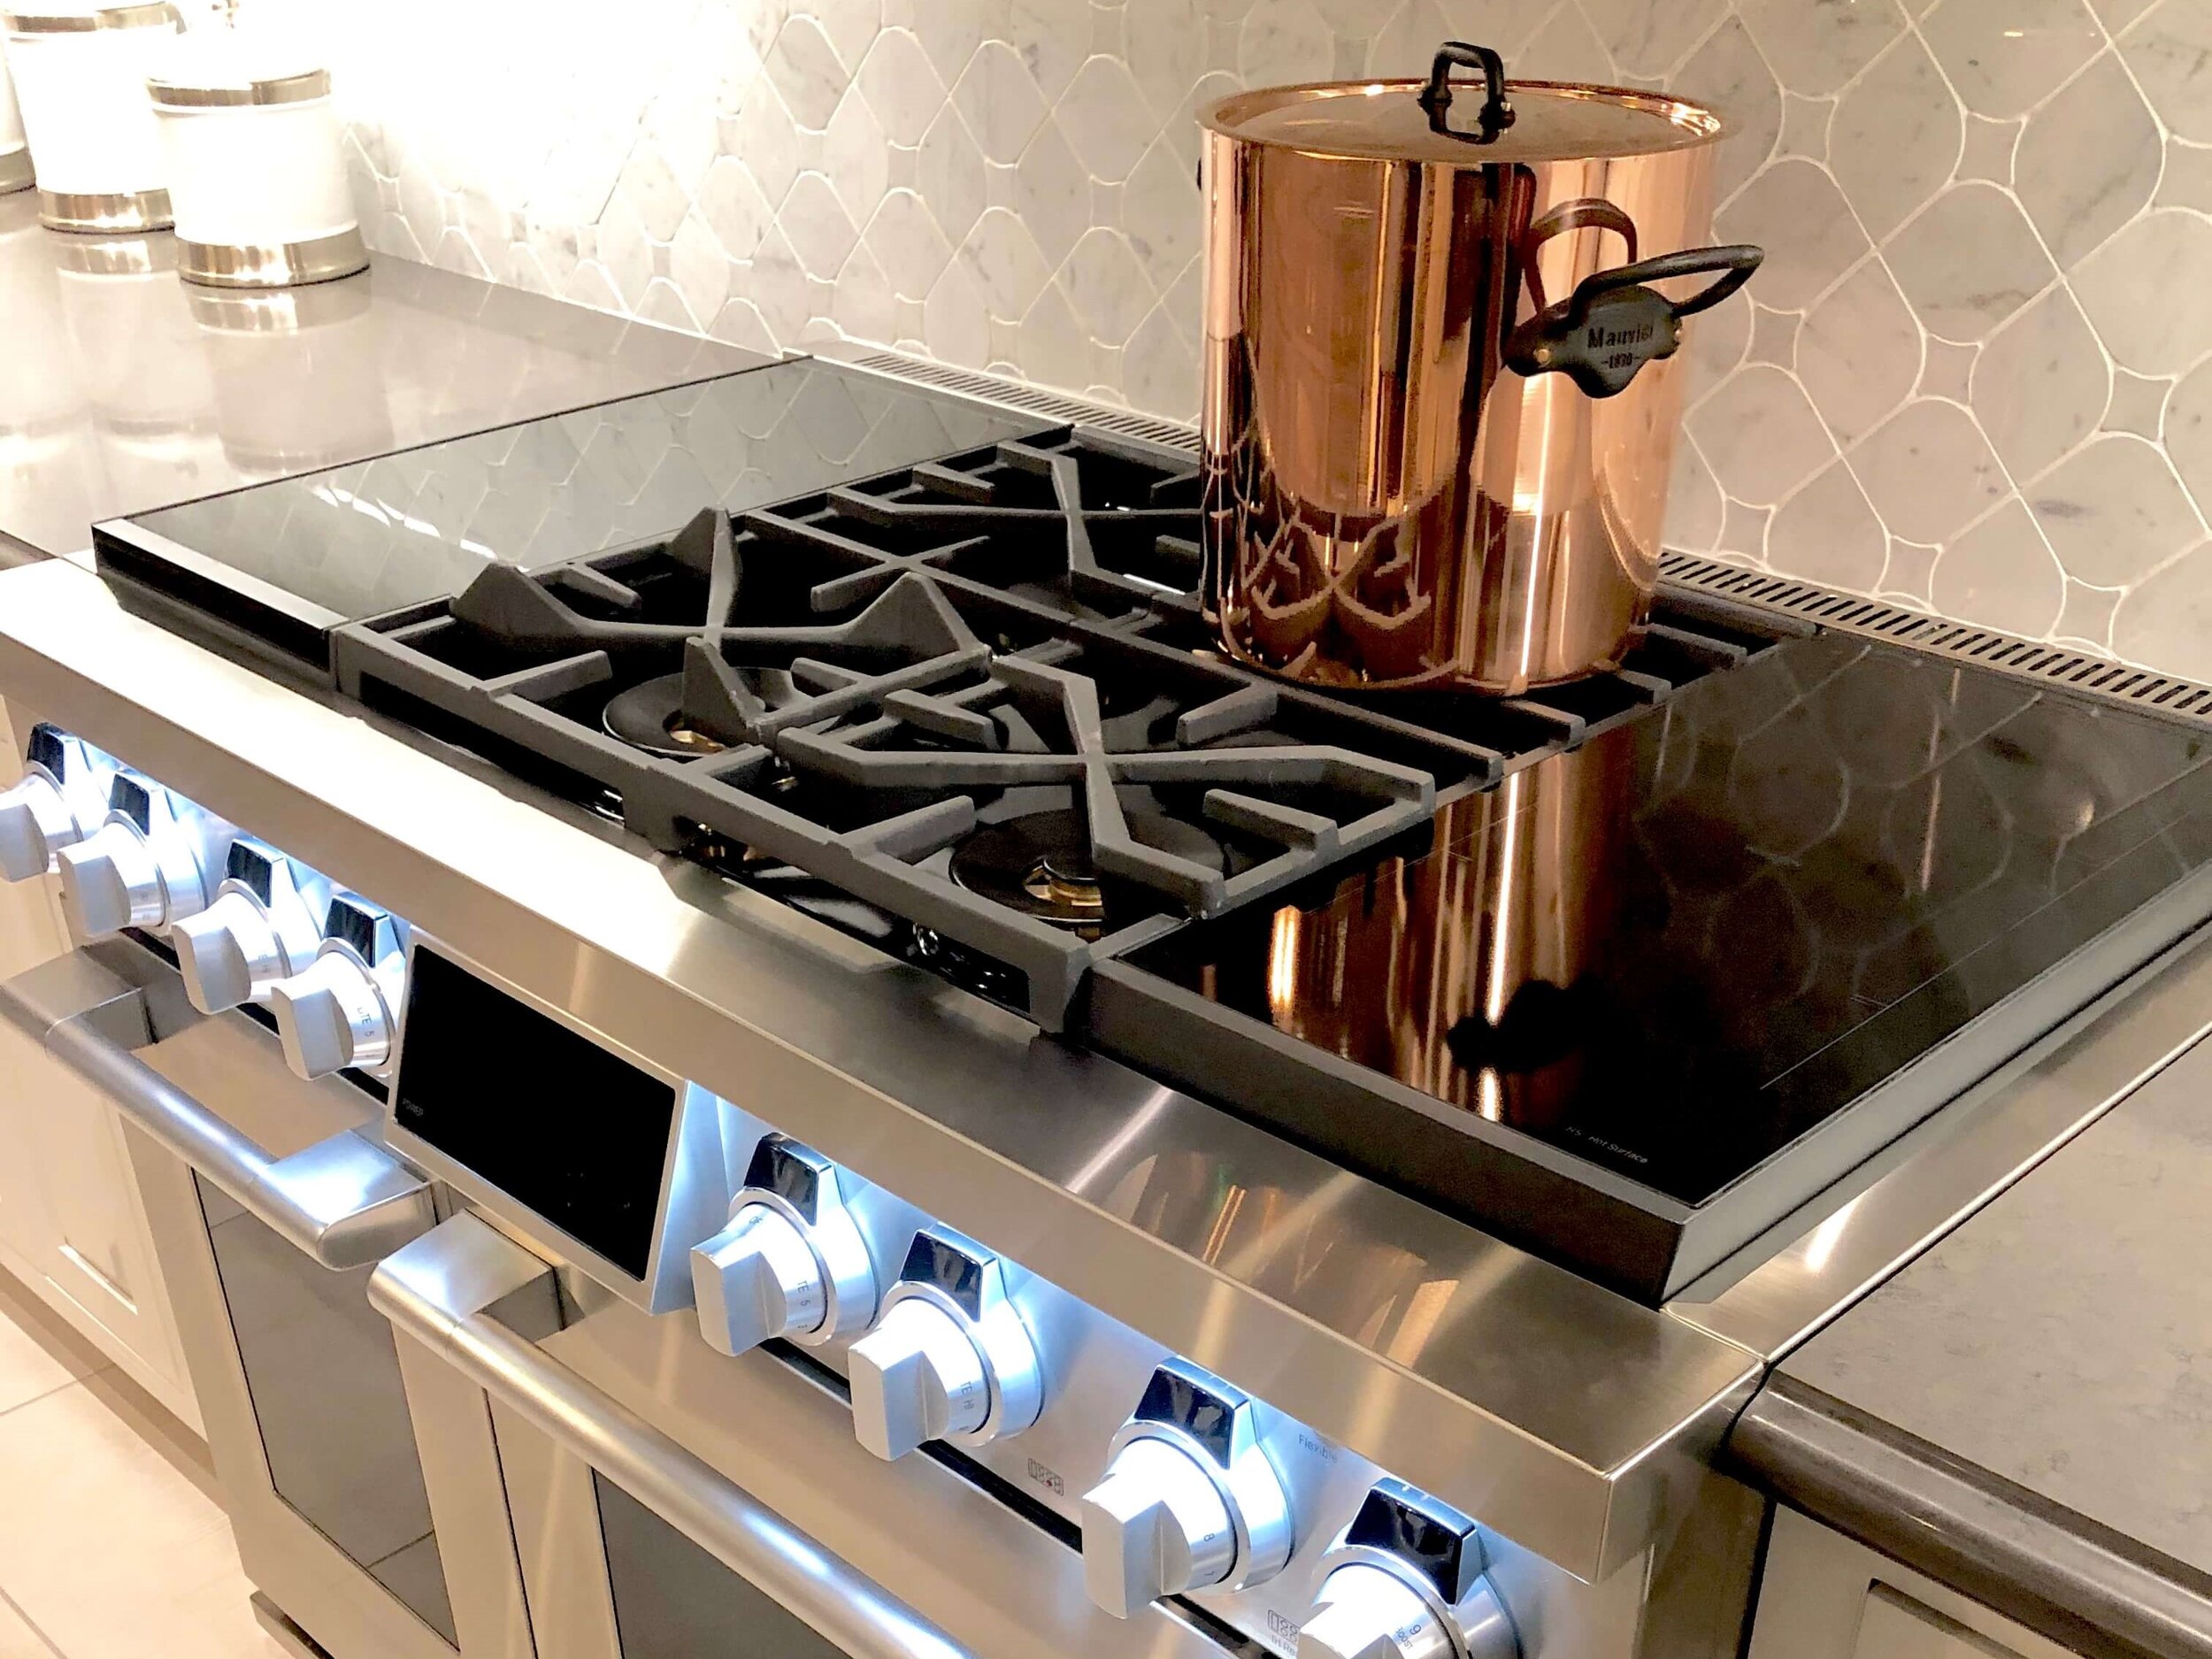 Cooking on a modern design gas stove burner - kitchen tools